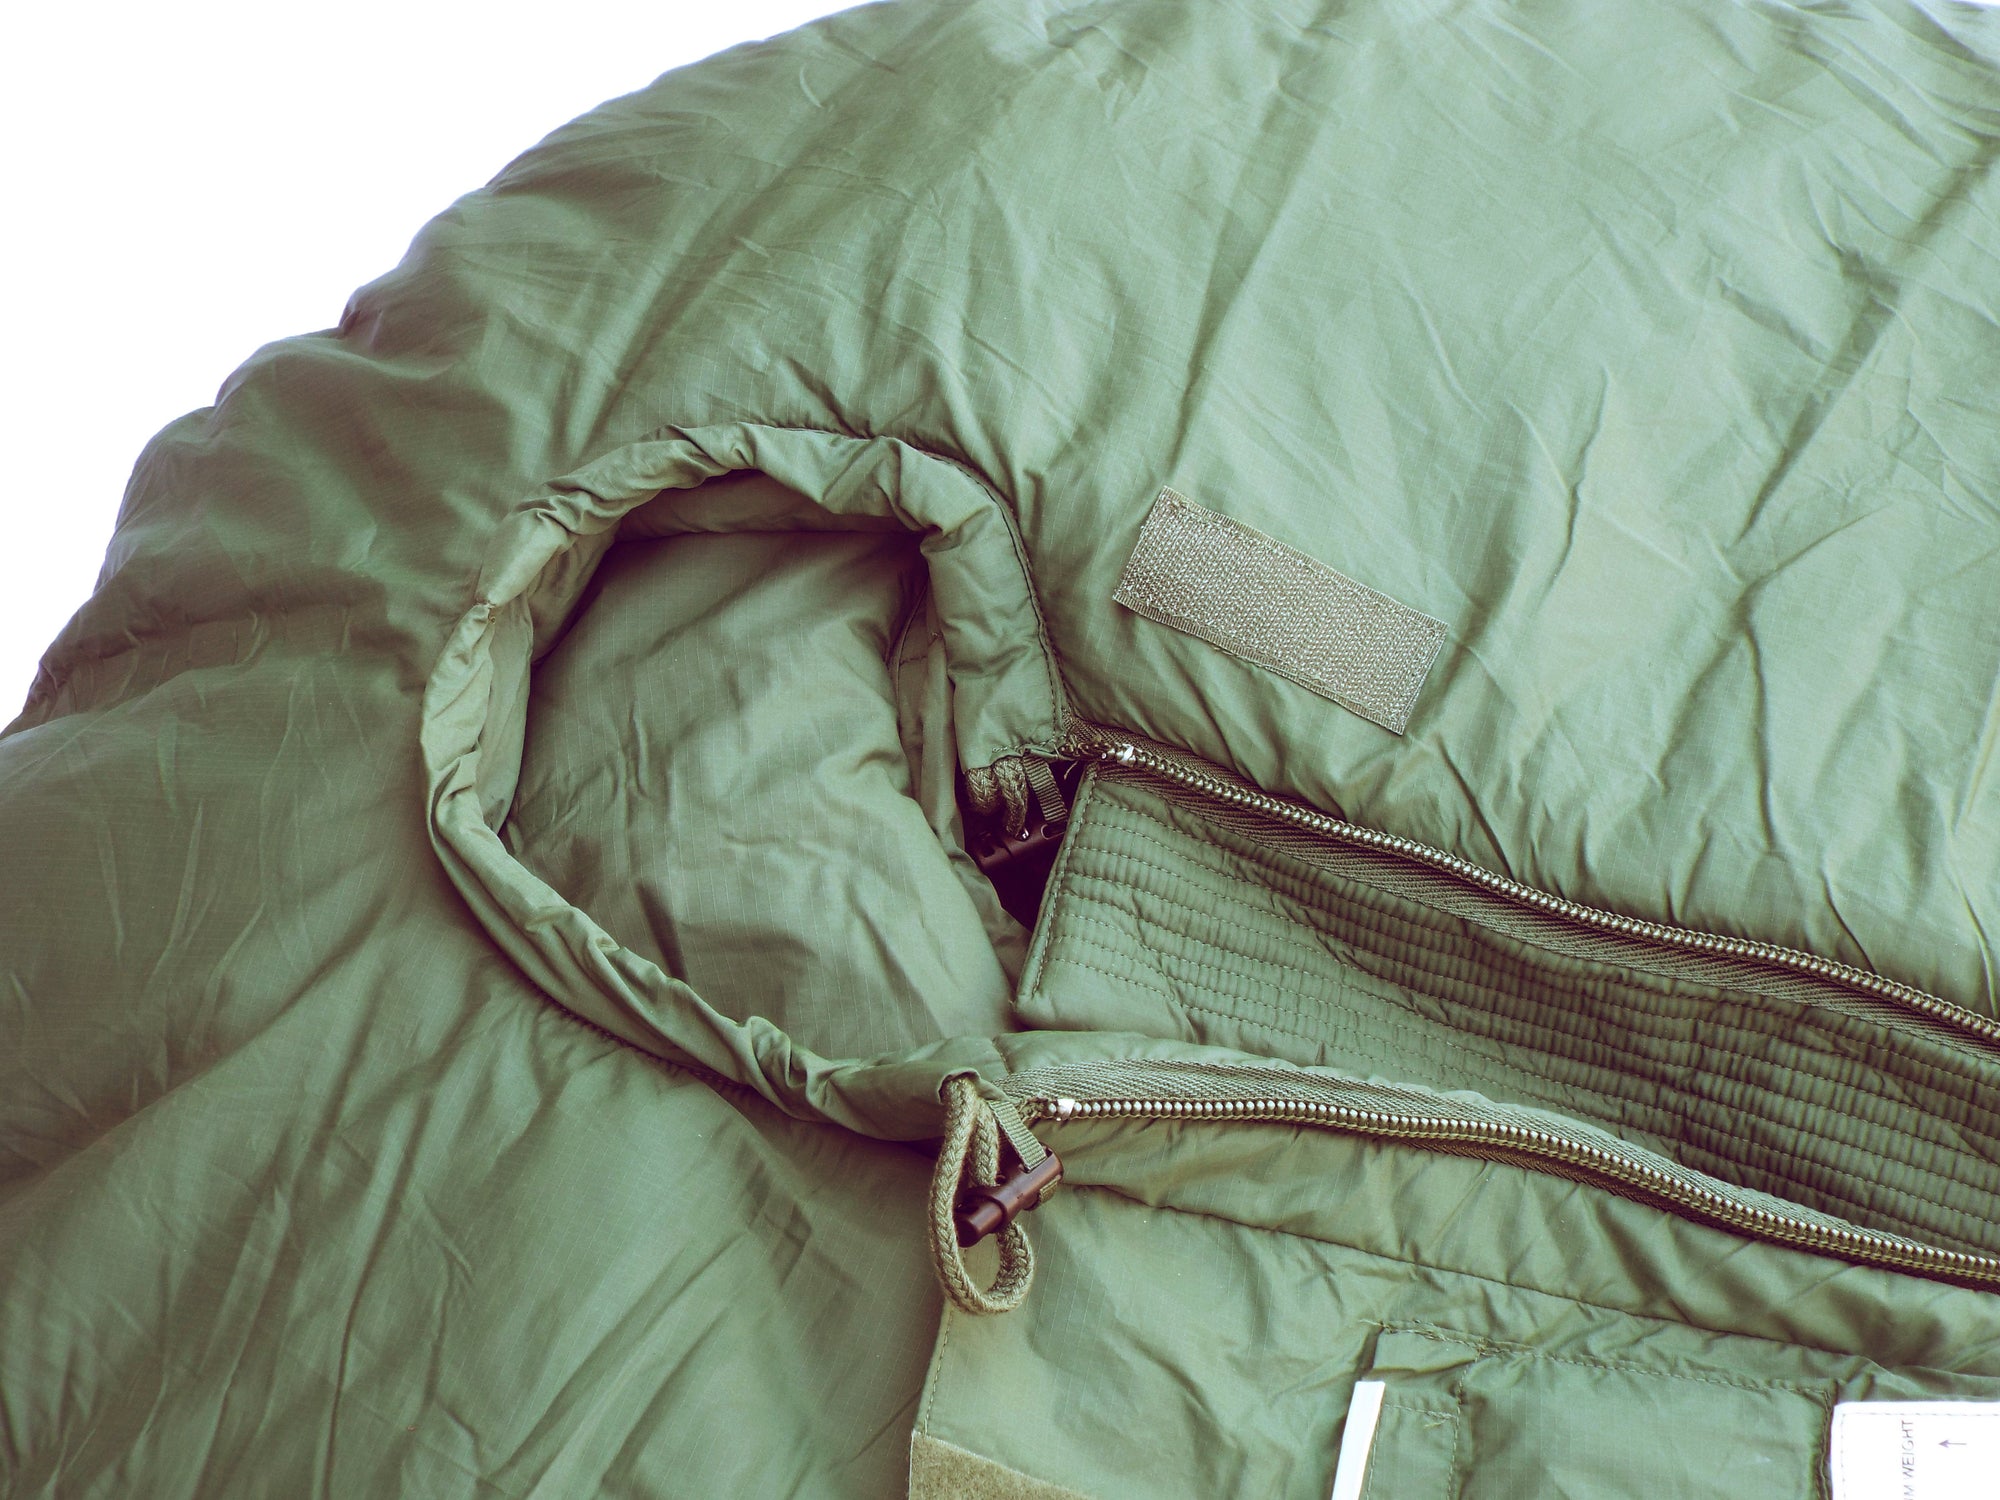 COMBO - British Military Four Season/Arctic modular (light and medium weight) sleeping bags system - current issue - with liner and string carry sack